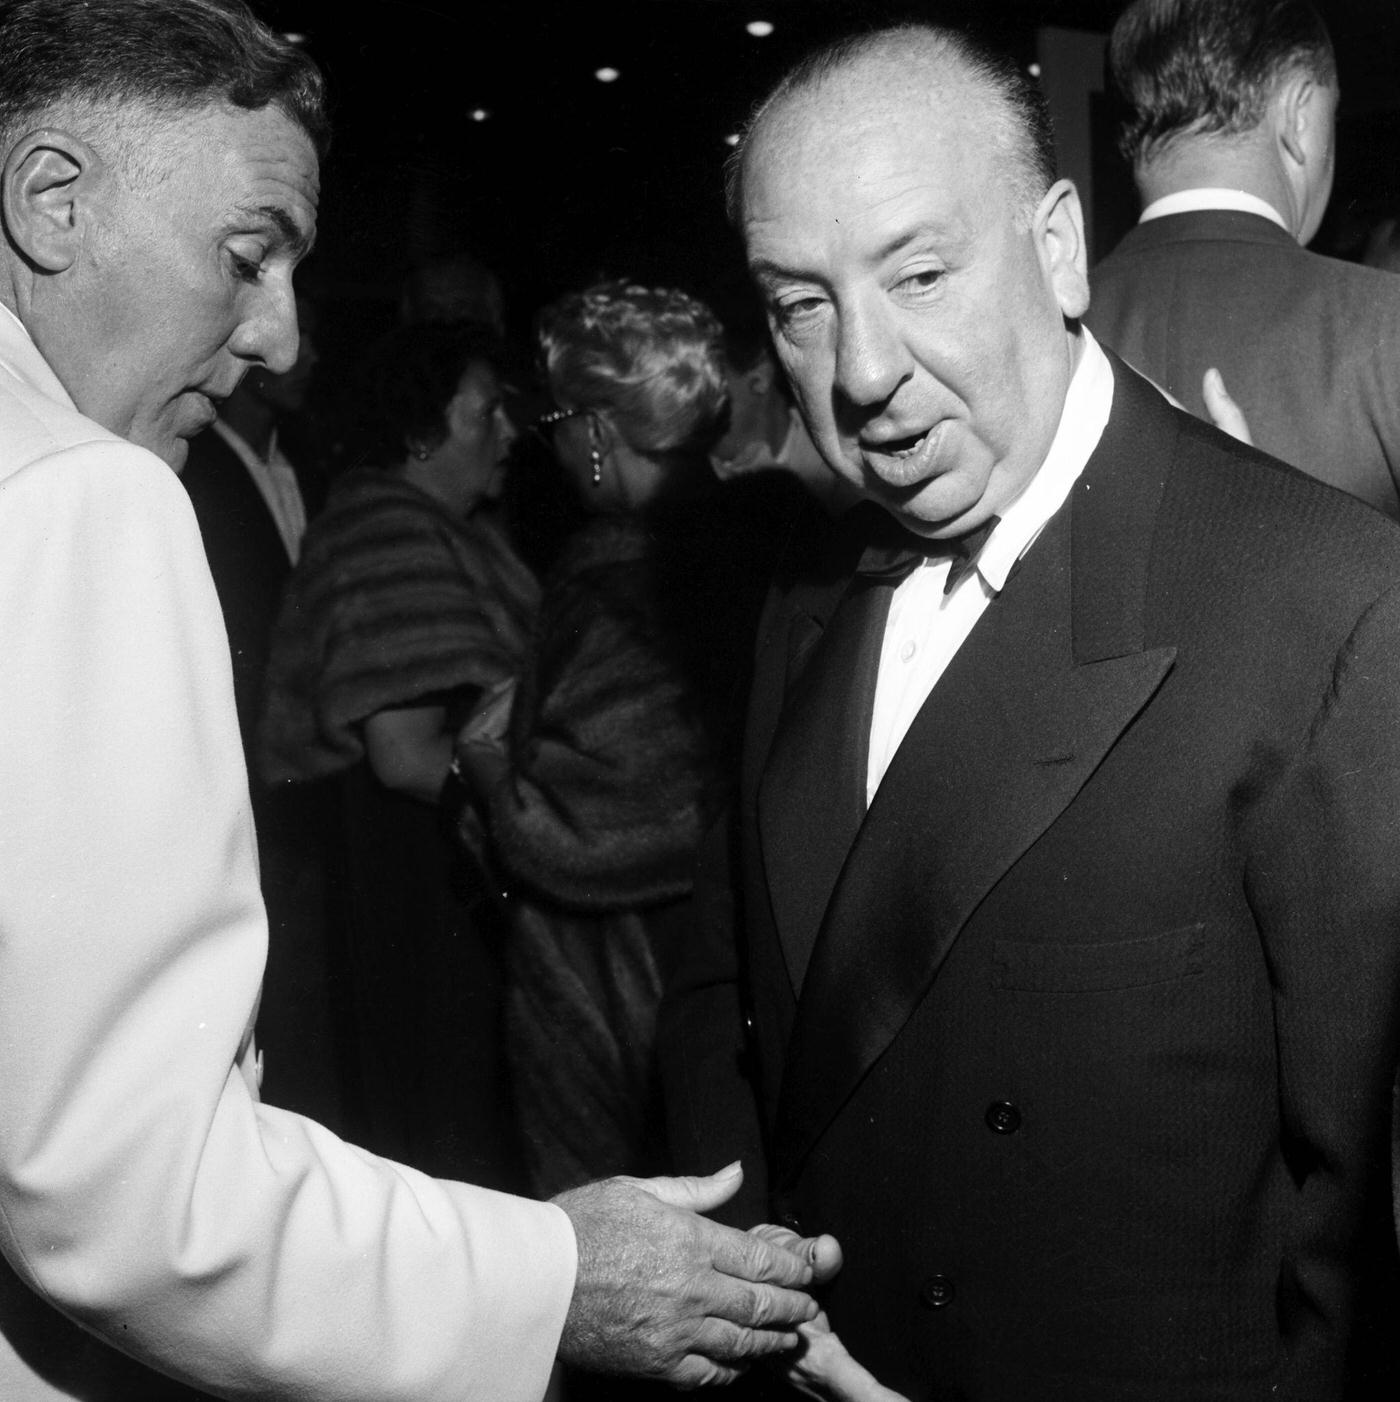 Alfred Hitchcock attends the premier of "Rear Window" in Los Angeles